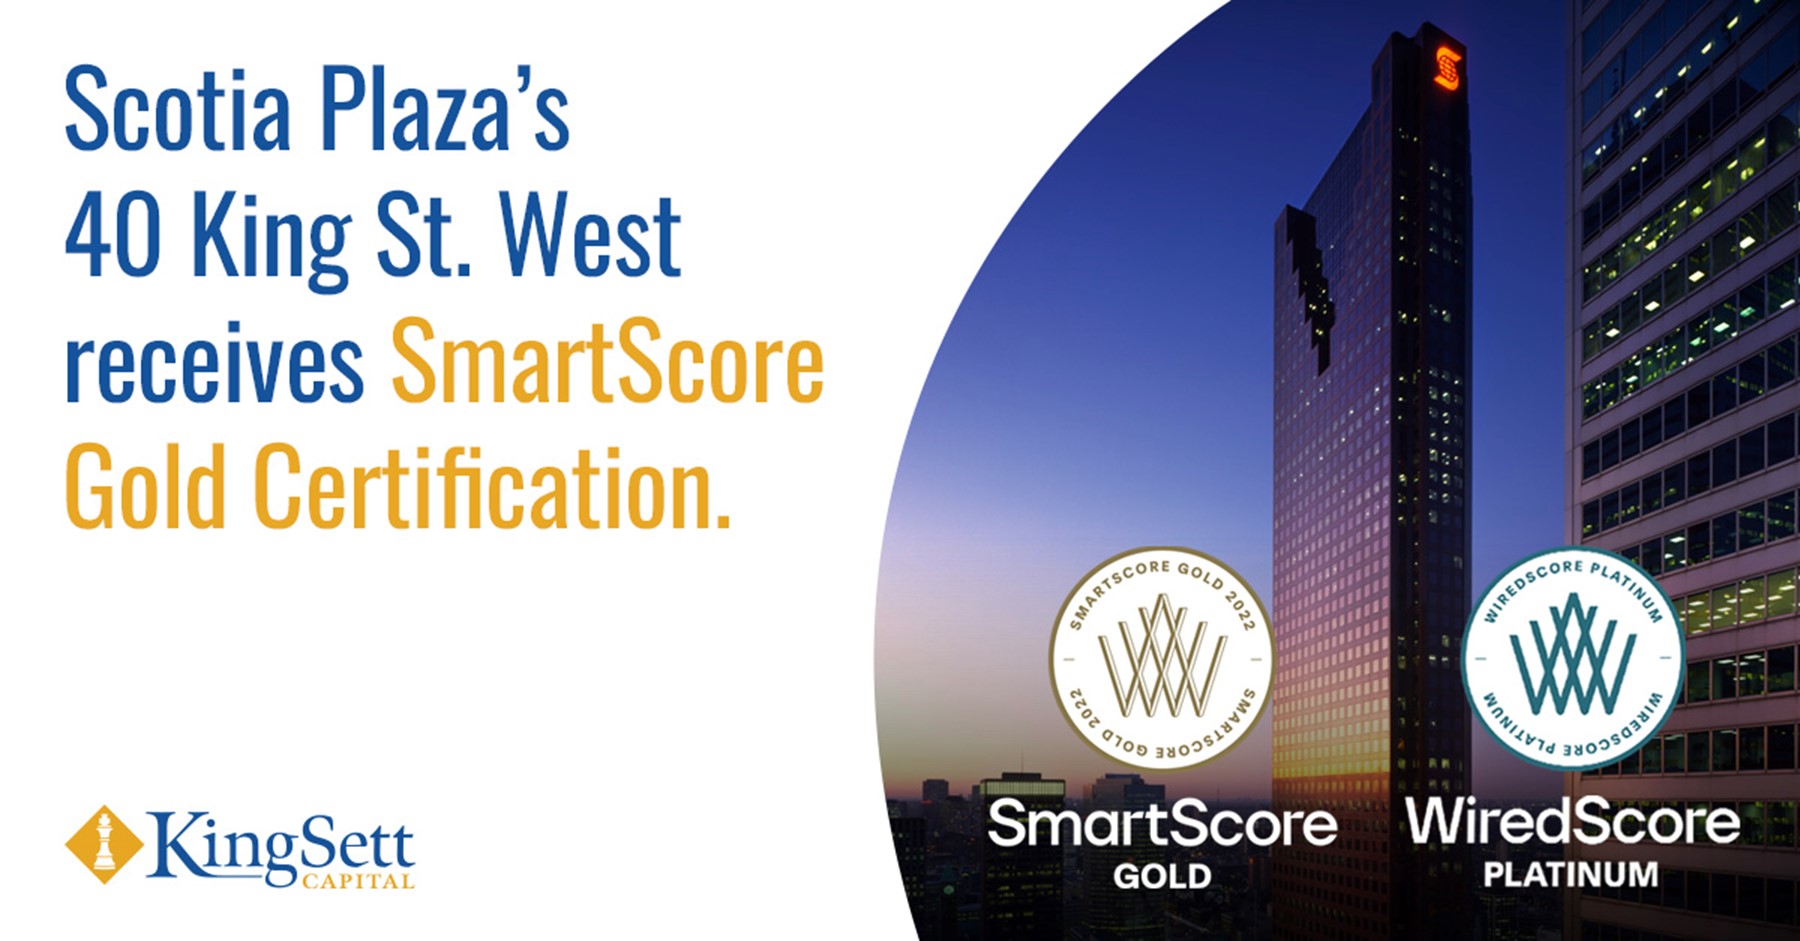 Scotia Plaza’s 40 King Street West by KingSett Capital Achieves SmartScore Gold Certification